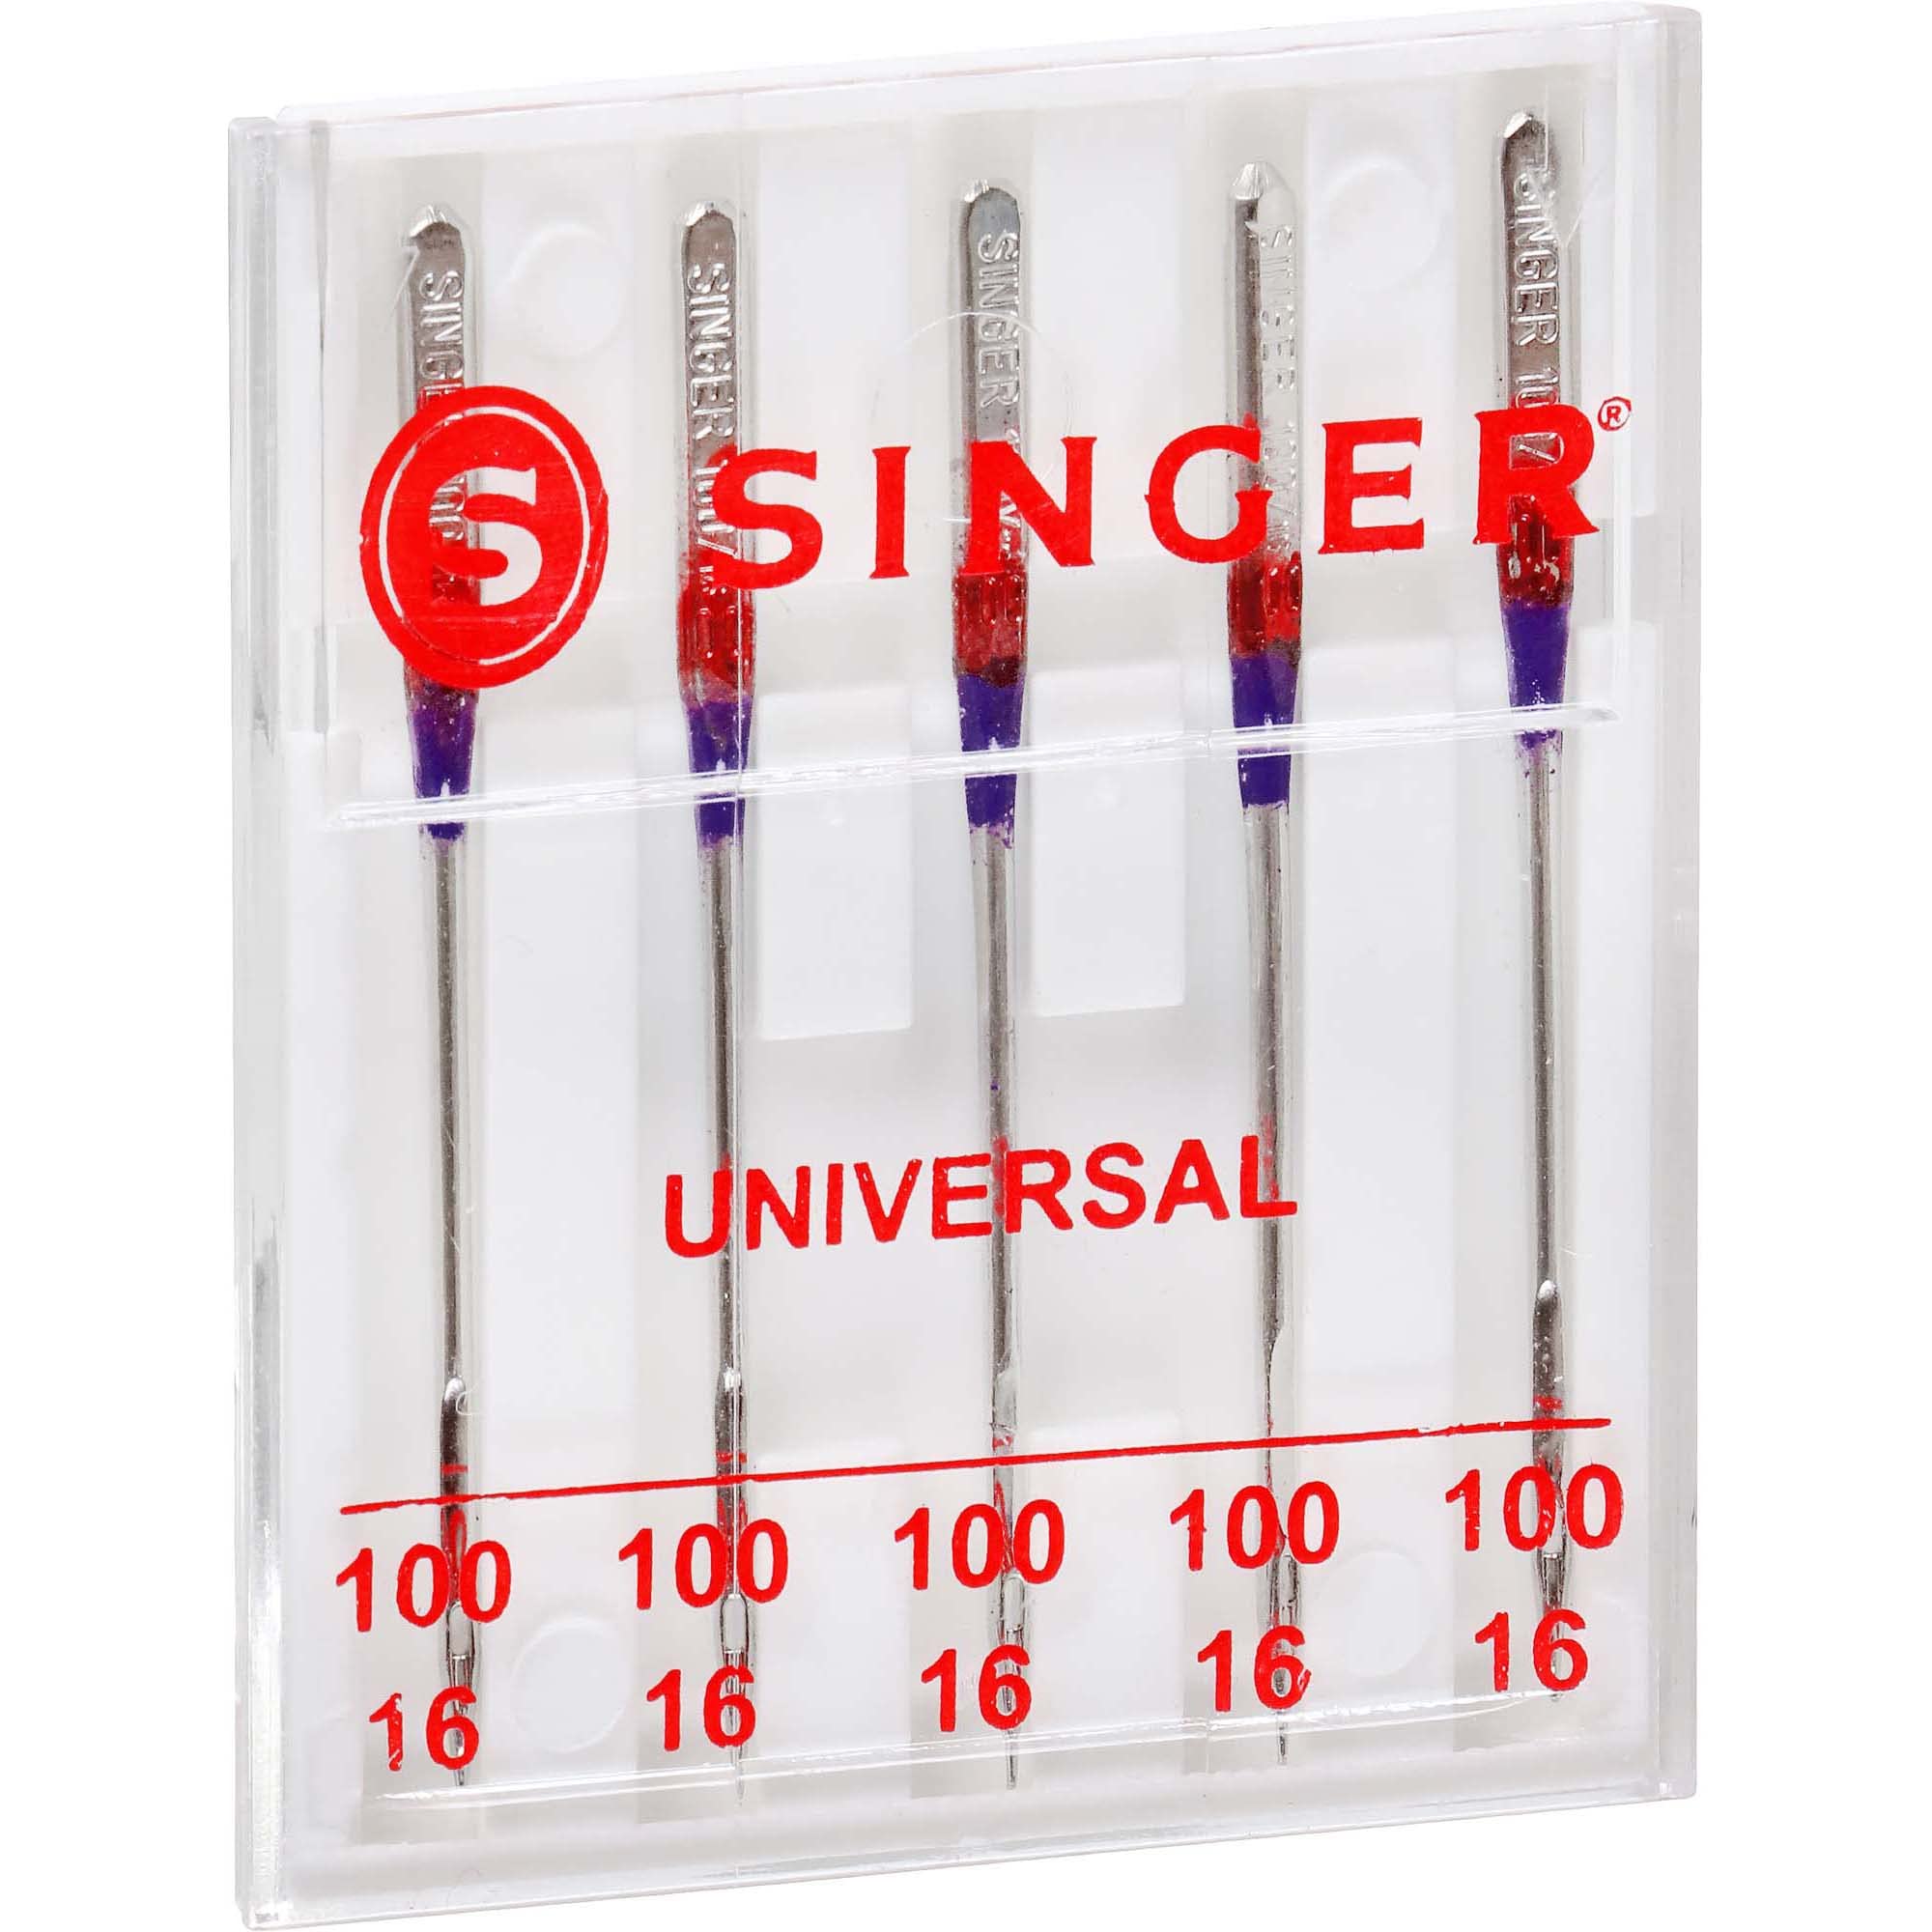 SINGER Heavy Duty Sewing Machine Needles, Size 100/16 - 5 Count